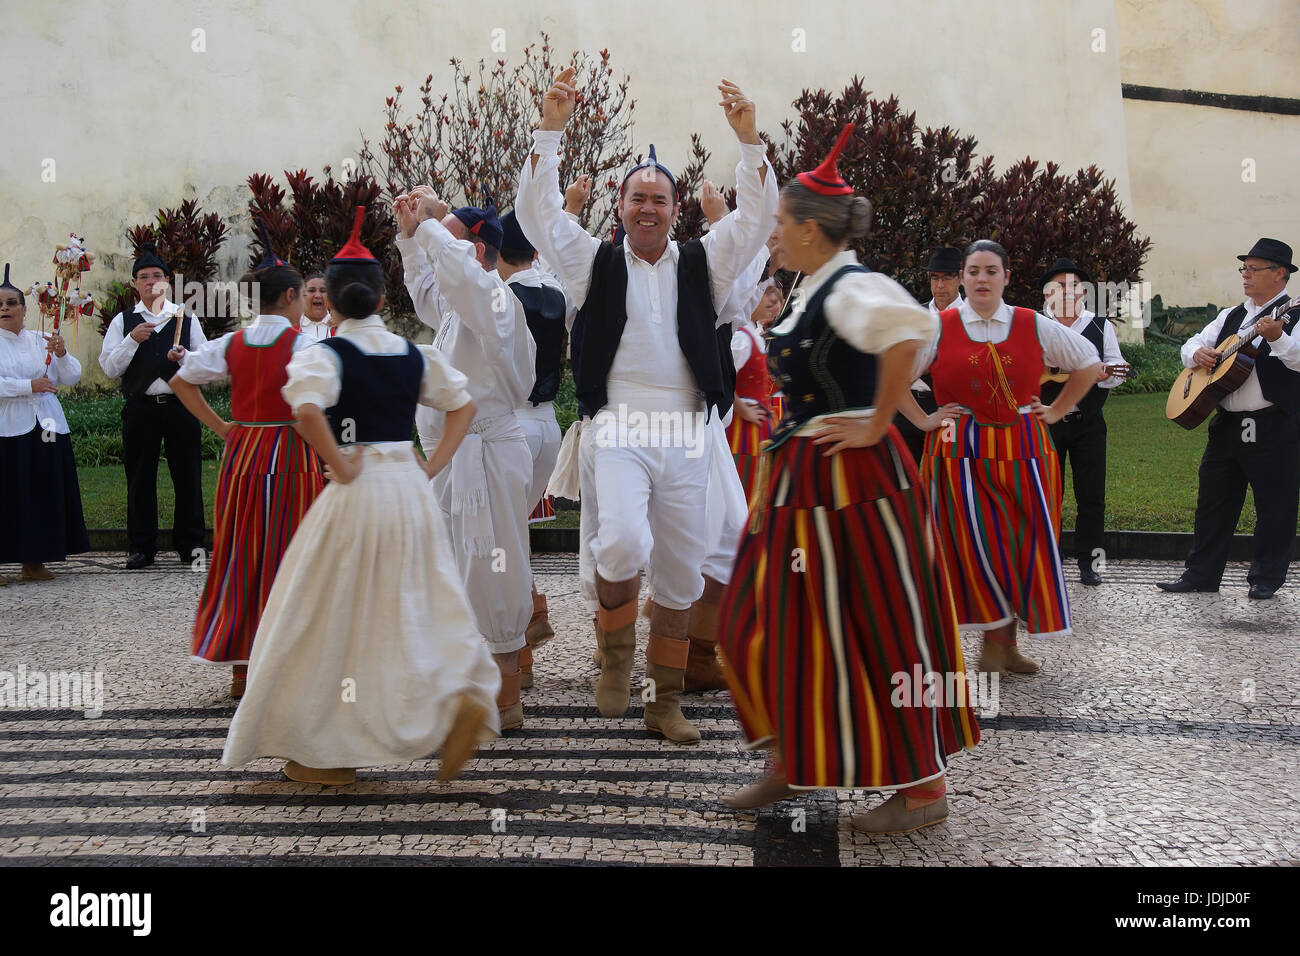 Europe, Portugal, Madeira, the Azores, island group, islands, Funchal, folklore, group, dance, dancing,, Europa, Azoren, Inselgruppe, Inseln, Folklore Stock Photo